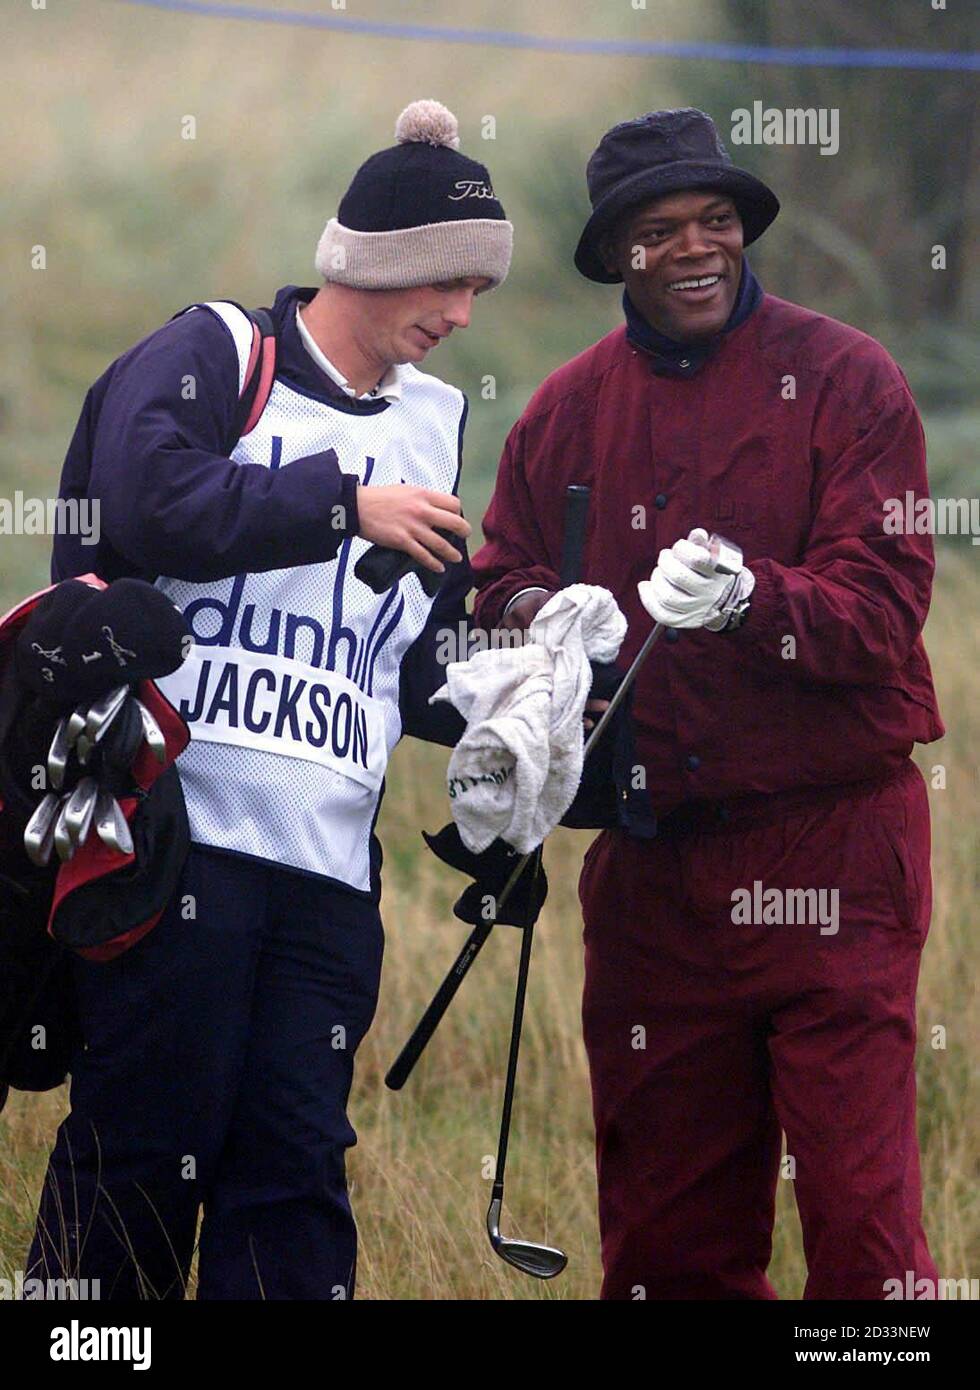 American movie actor Samuel L Jackson shares a joke with his caddy at the Dunhill Links Championships at Carnoustie, Scotland. lwpp Stock Photo